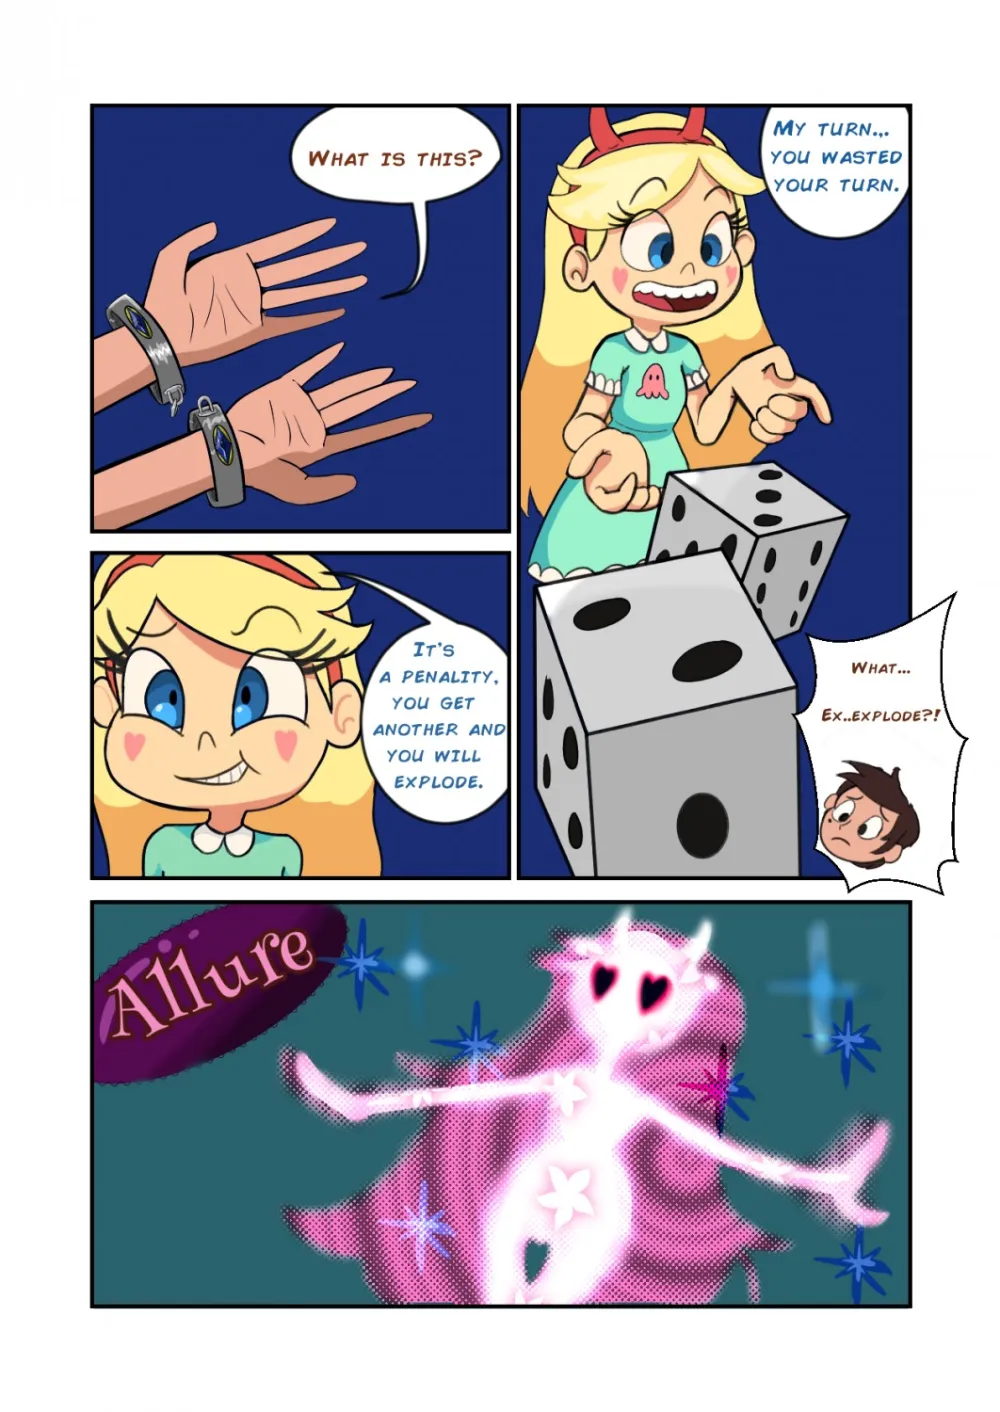 Star Vs. the board game of lust - Page 7